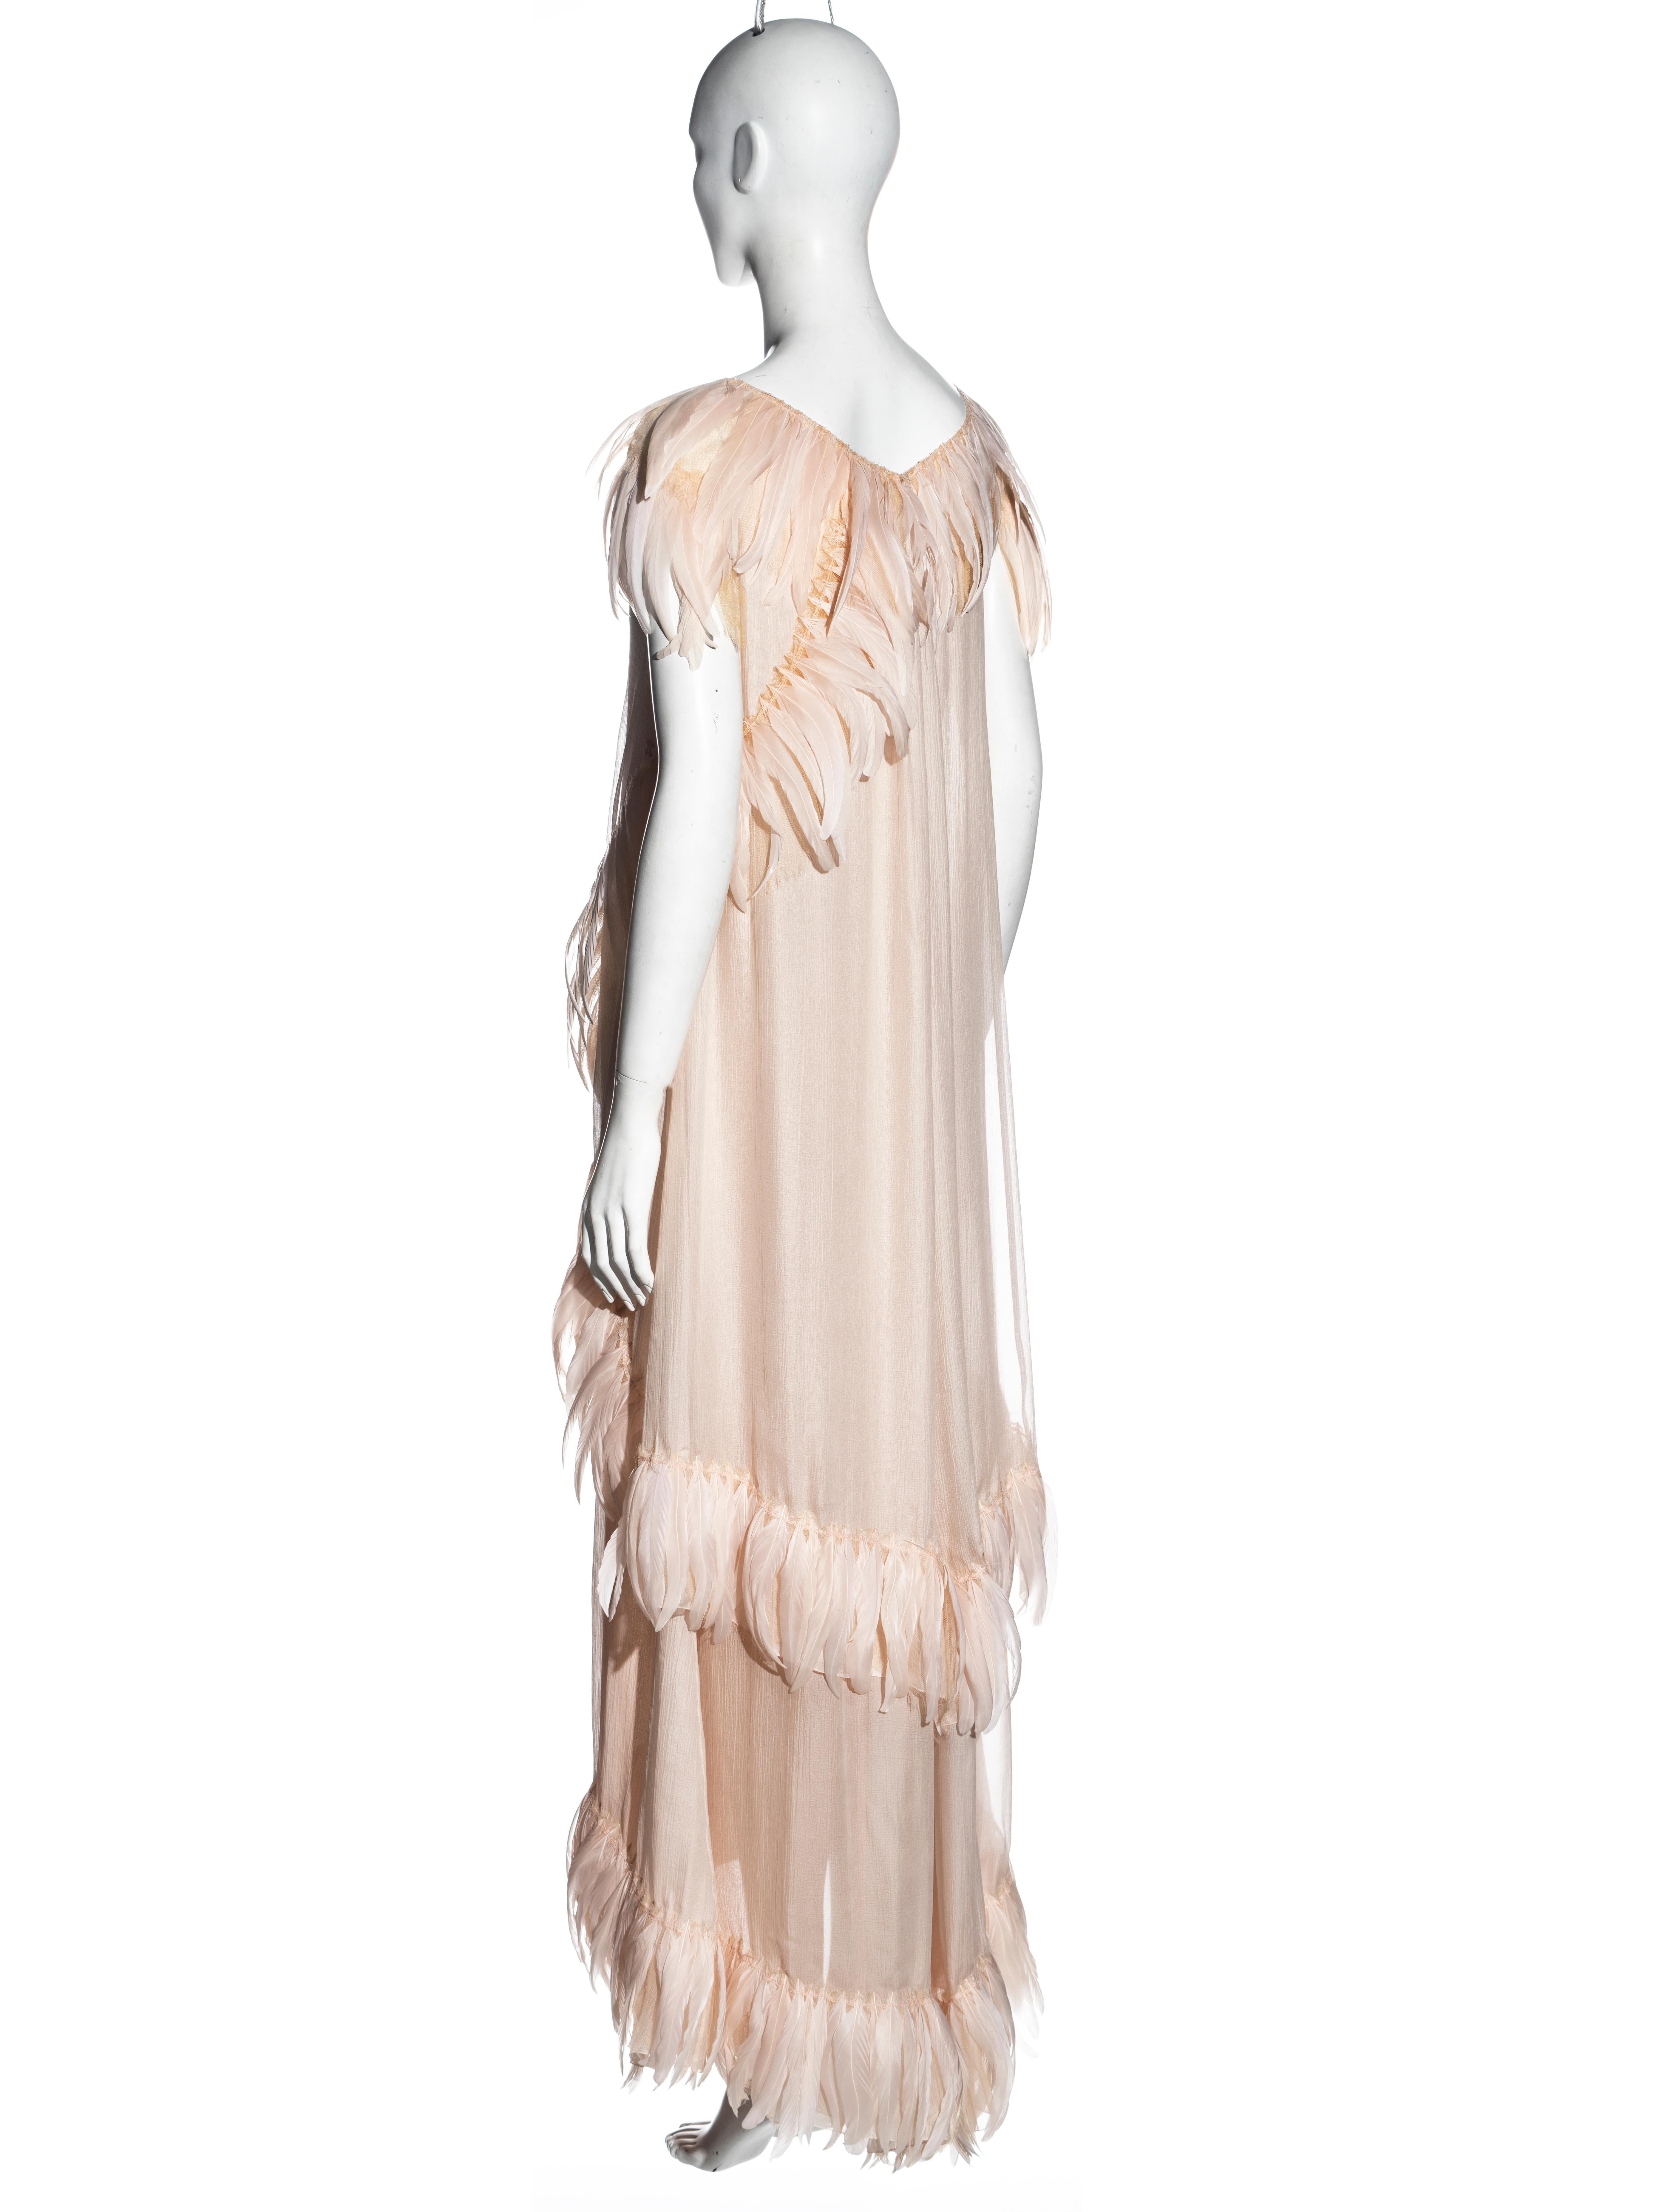 Chanel by Karl Lagerfeld silk chiffon evening dress with feathers, cr 2009 6